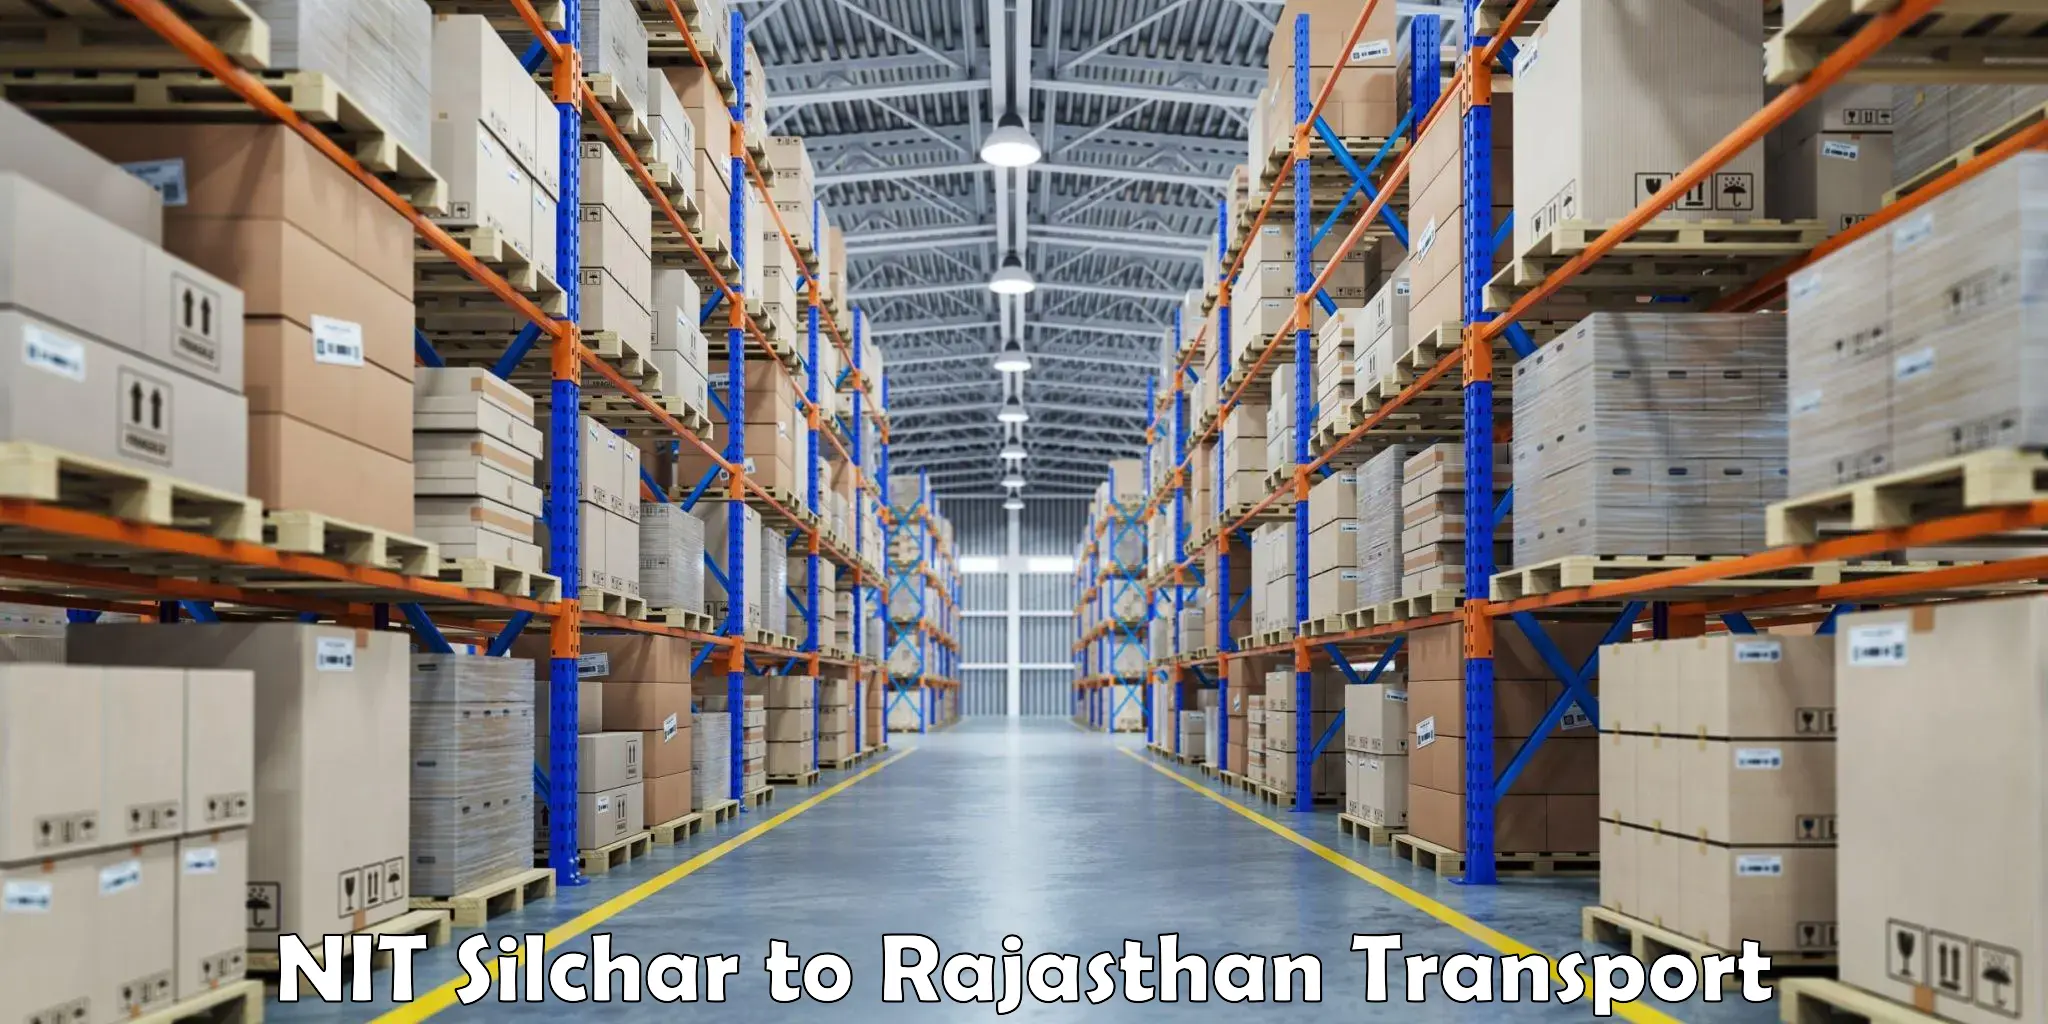 Road transport online services NIT Silchar to Buhana